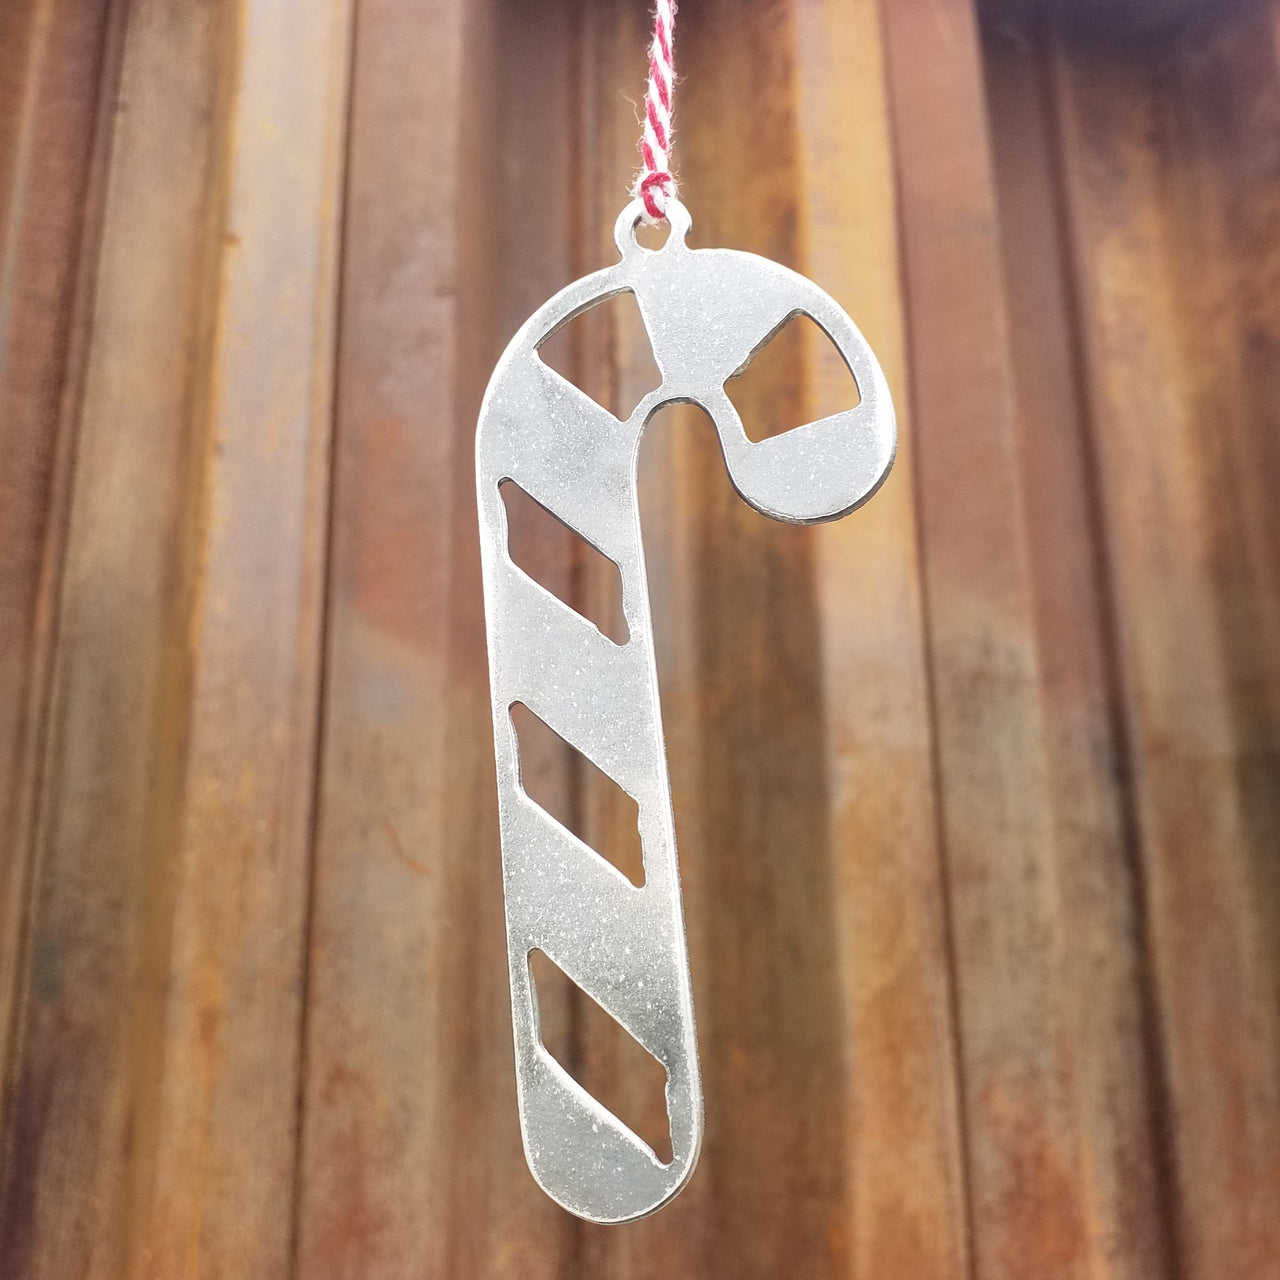 Candy Cane Christmas Ornament - FREE SHIPPING, Stocking Stuffer, Holiday Gift, Tree